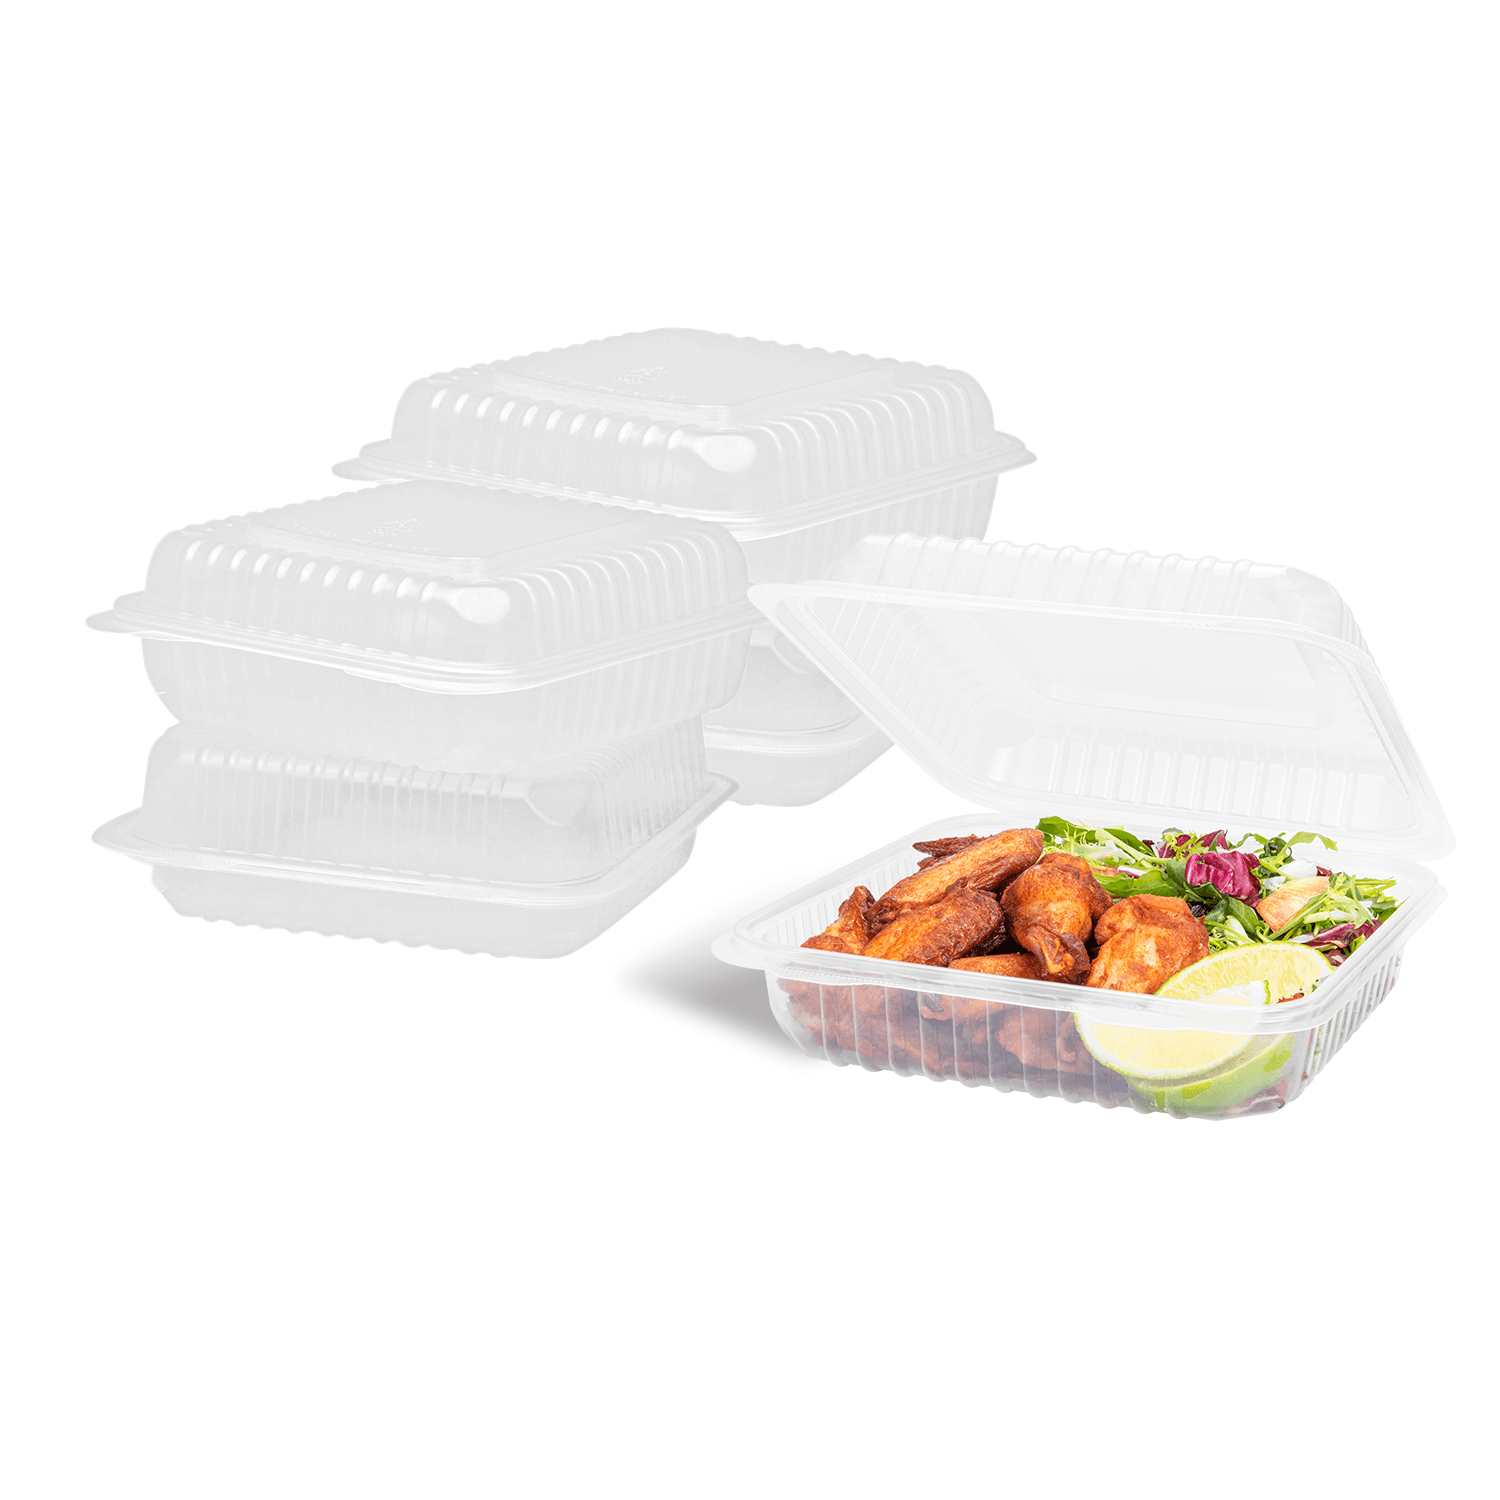 Karat 9"x 9" PP Plastic Hinged Containers stacked and one with food open